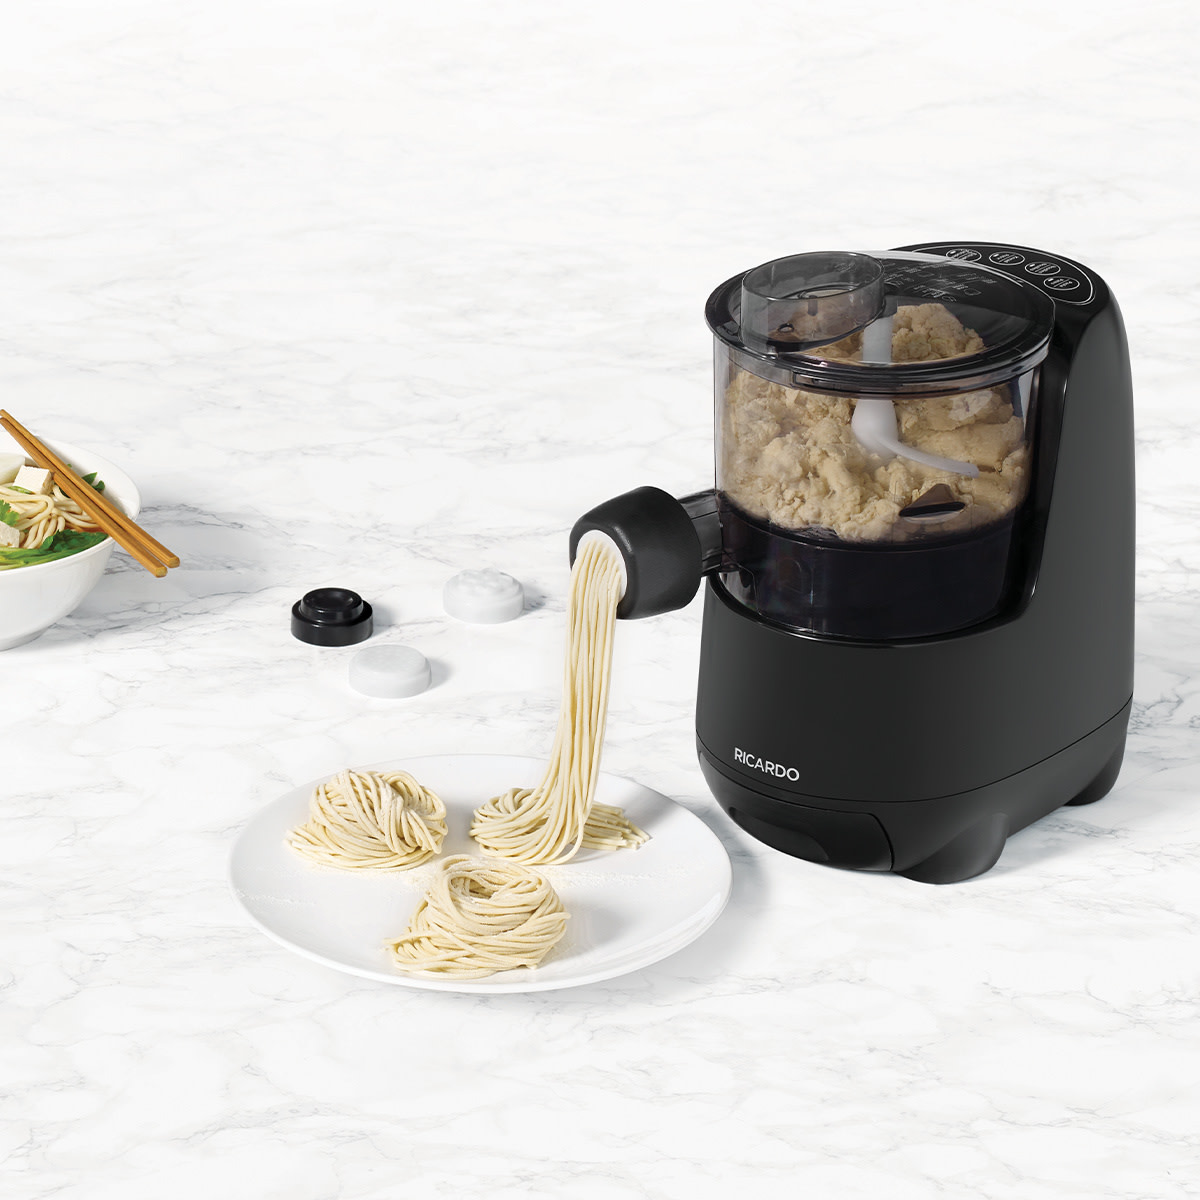 Pasta and noodle maker